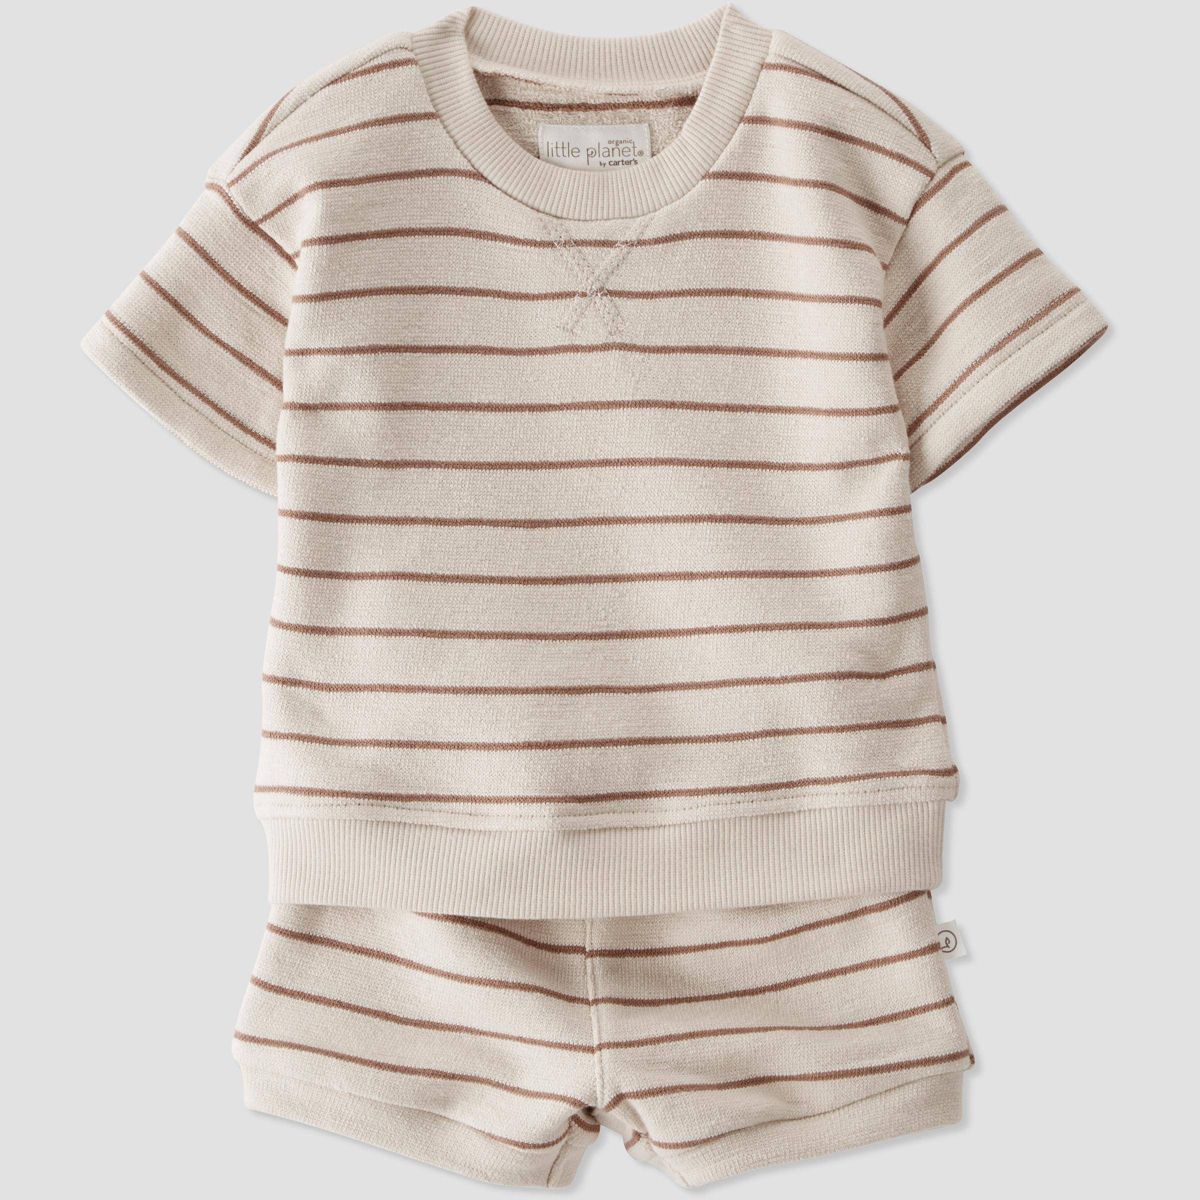 Little Planet by Carter's Organic Baby 2pc Striped Shorts Set - Brown | Target